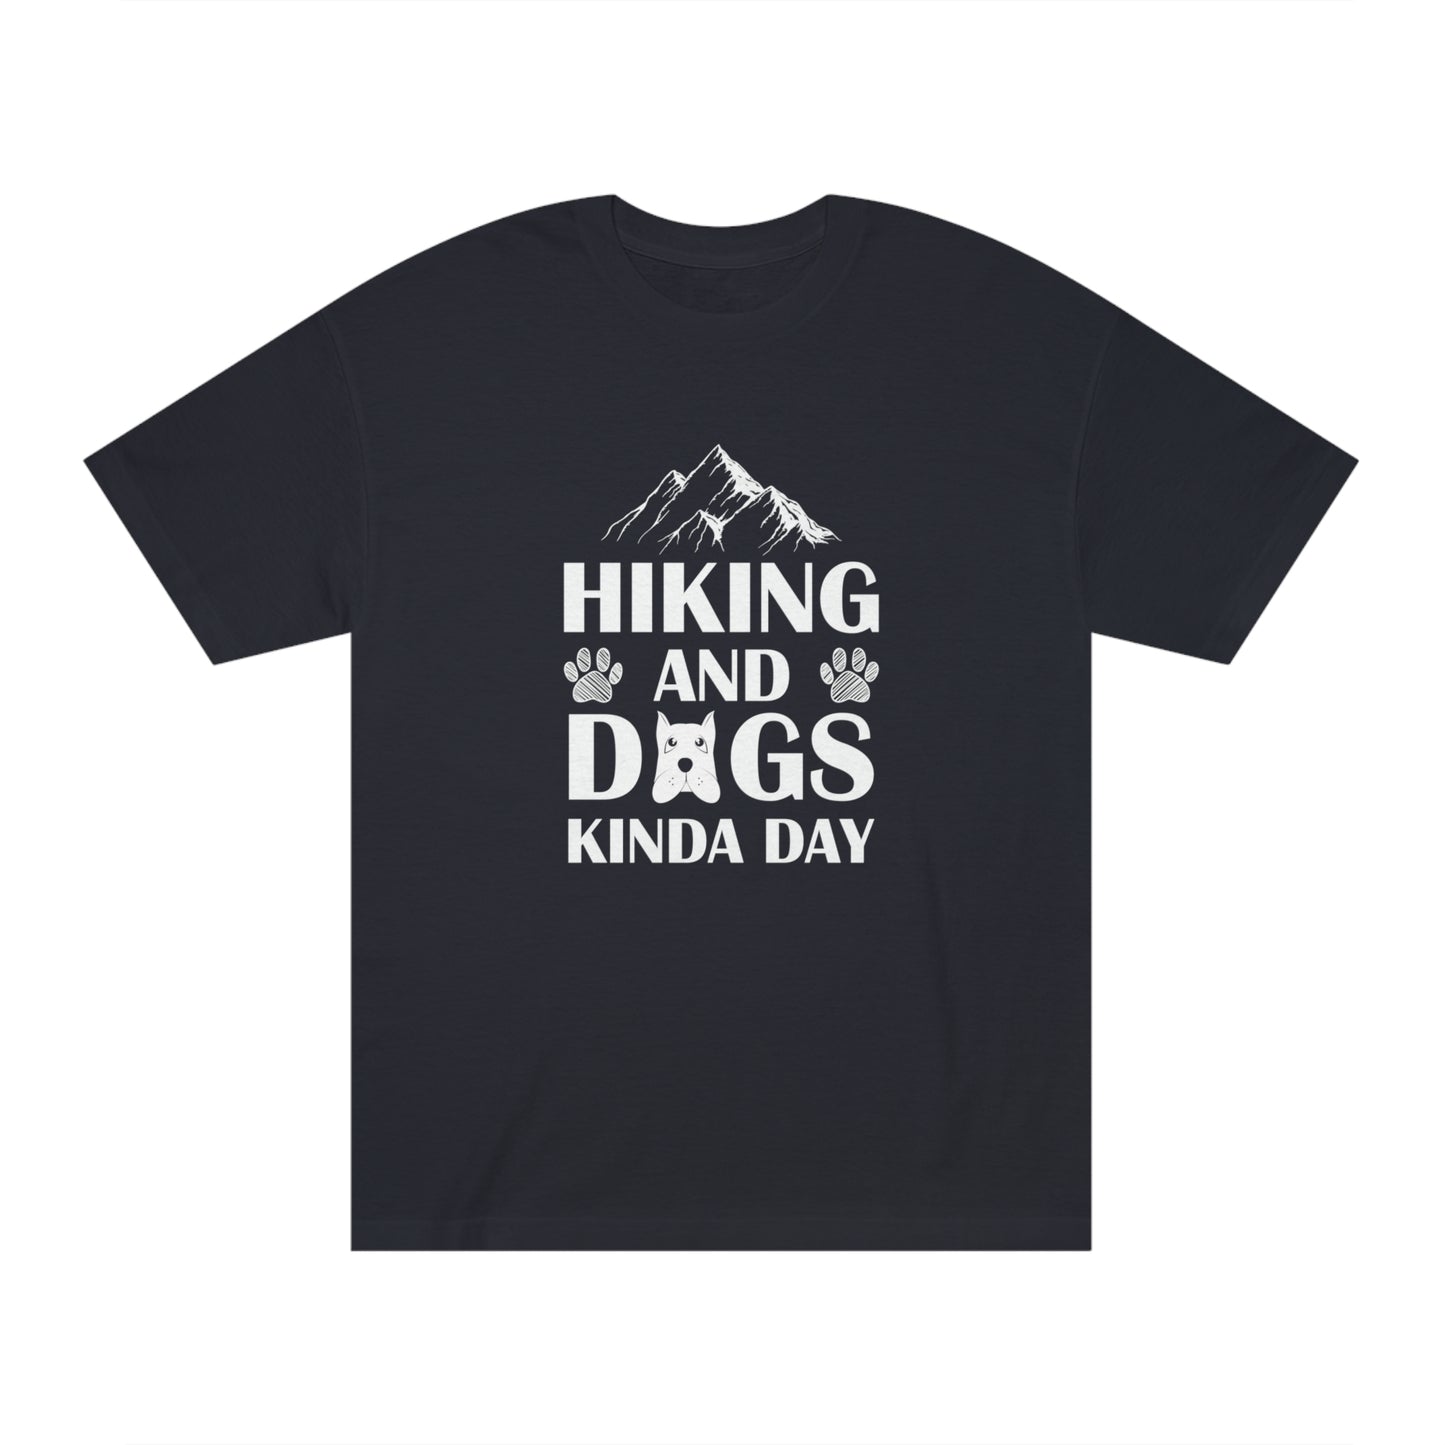 Hiking and dogs kinda day Unisex Classic Tee